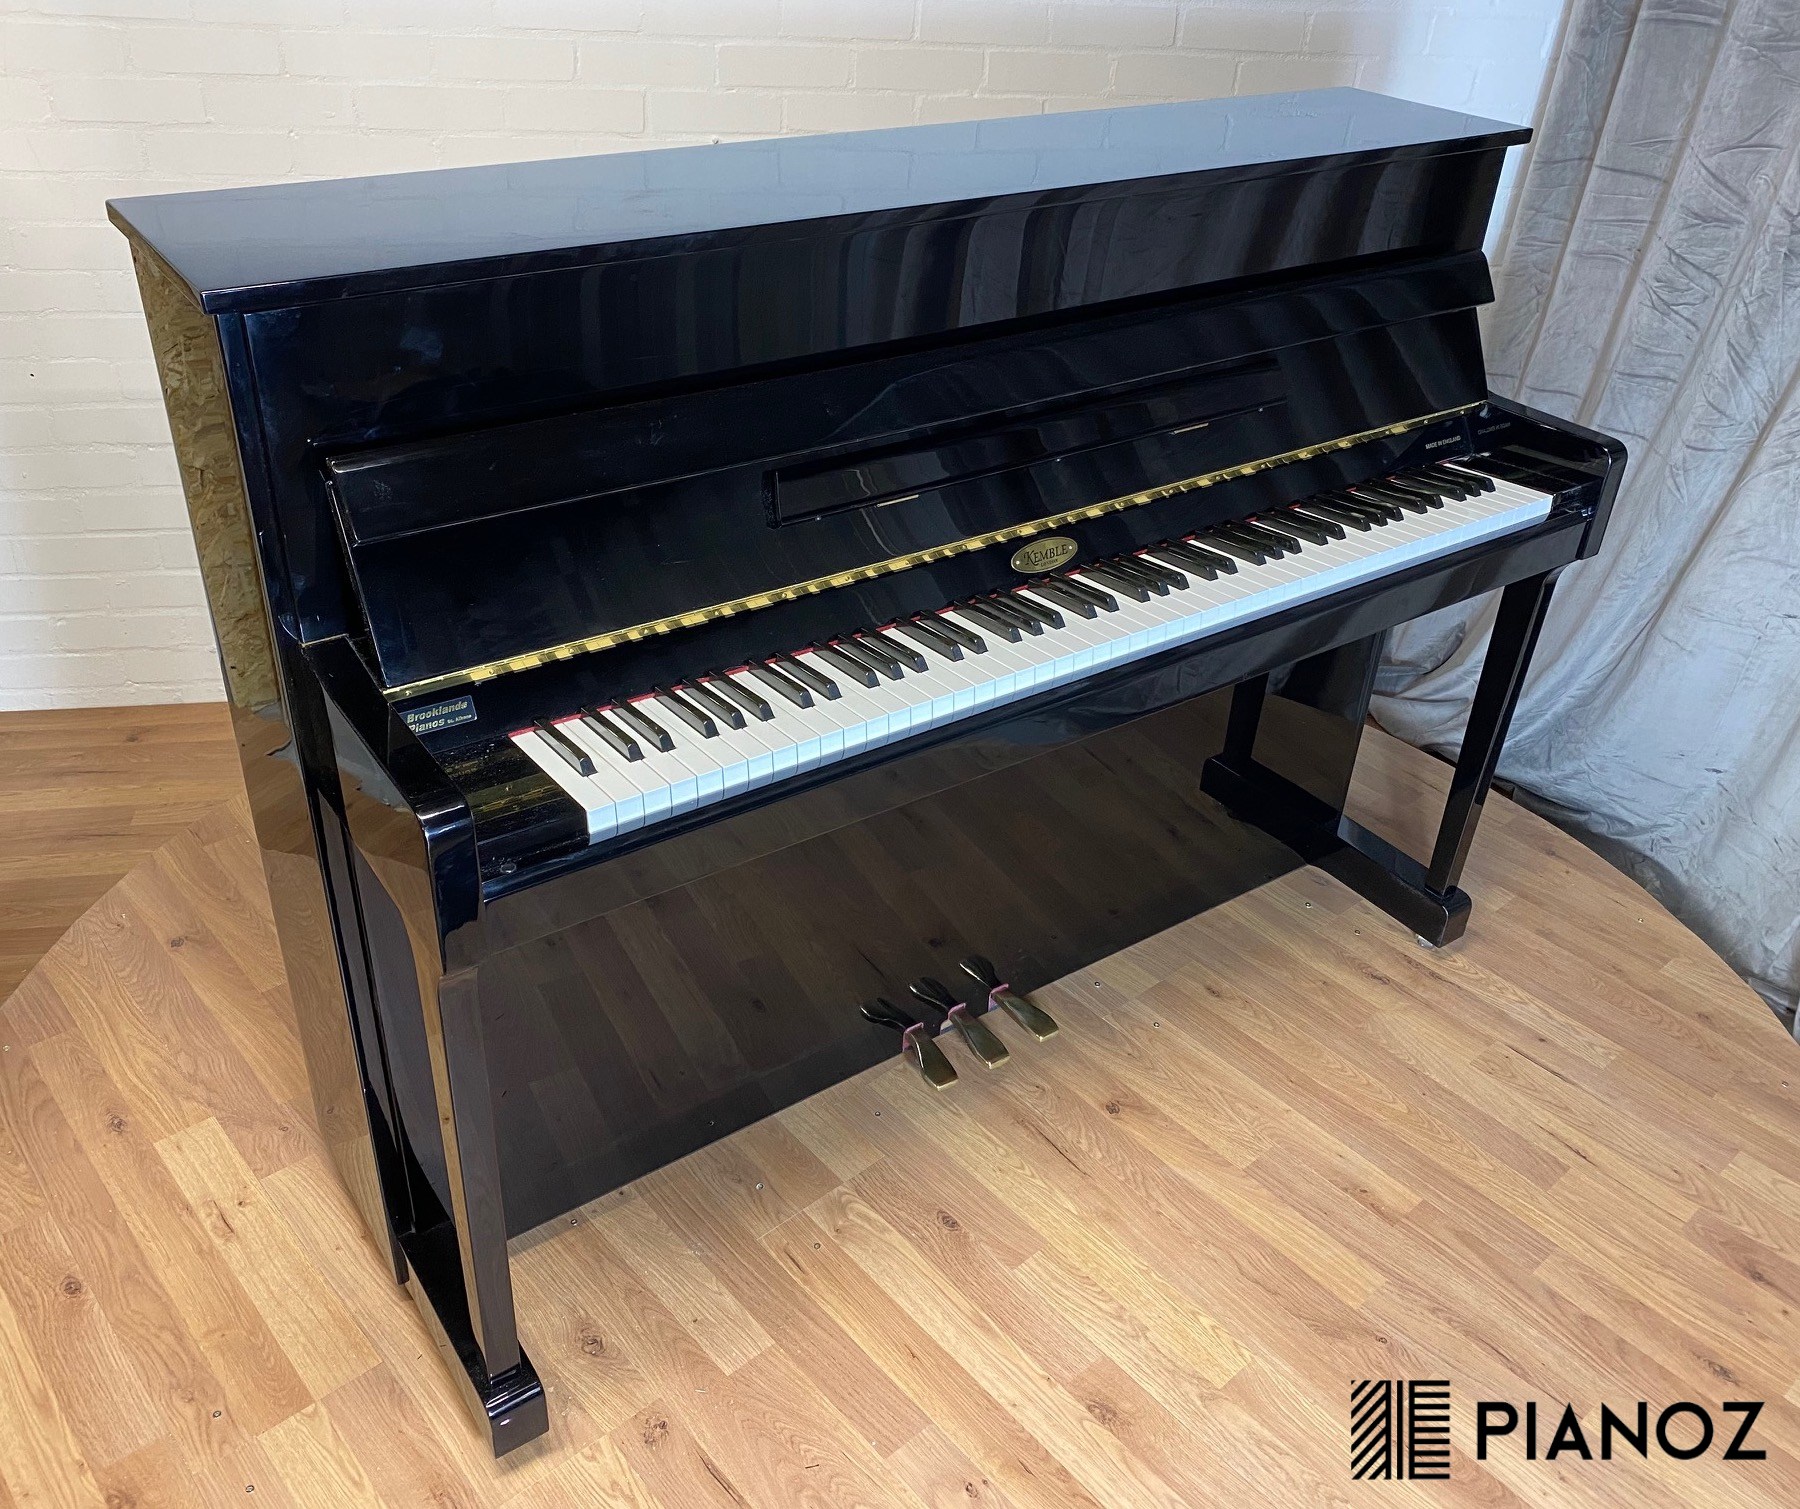 Yamaha Silent System Kemble Upright Piano piano for sale in UK